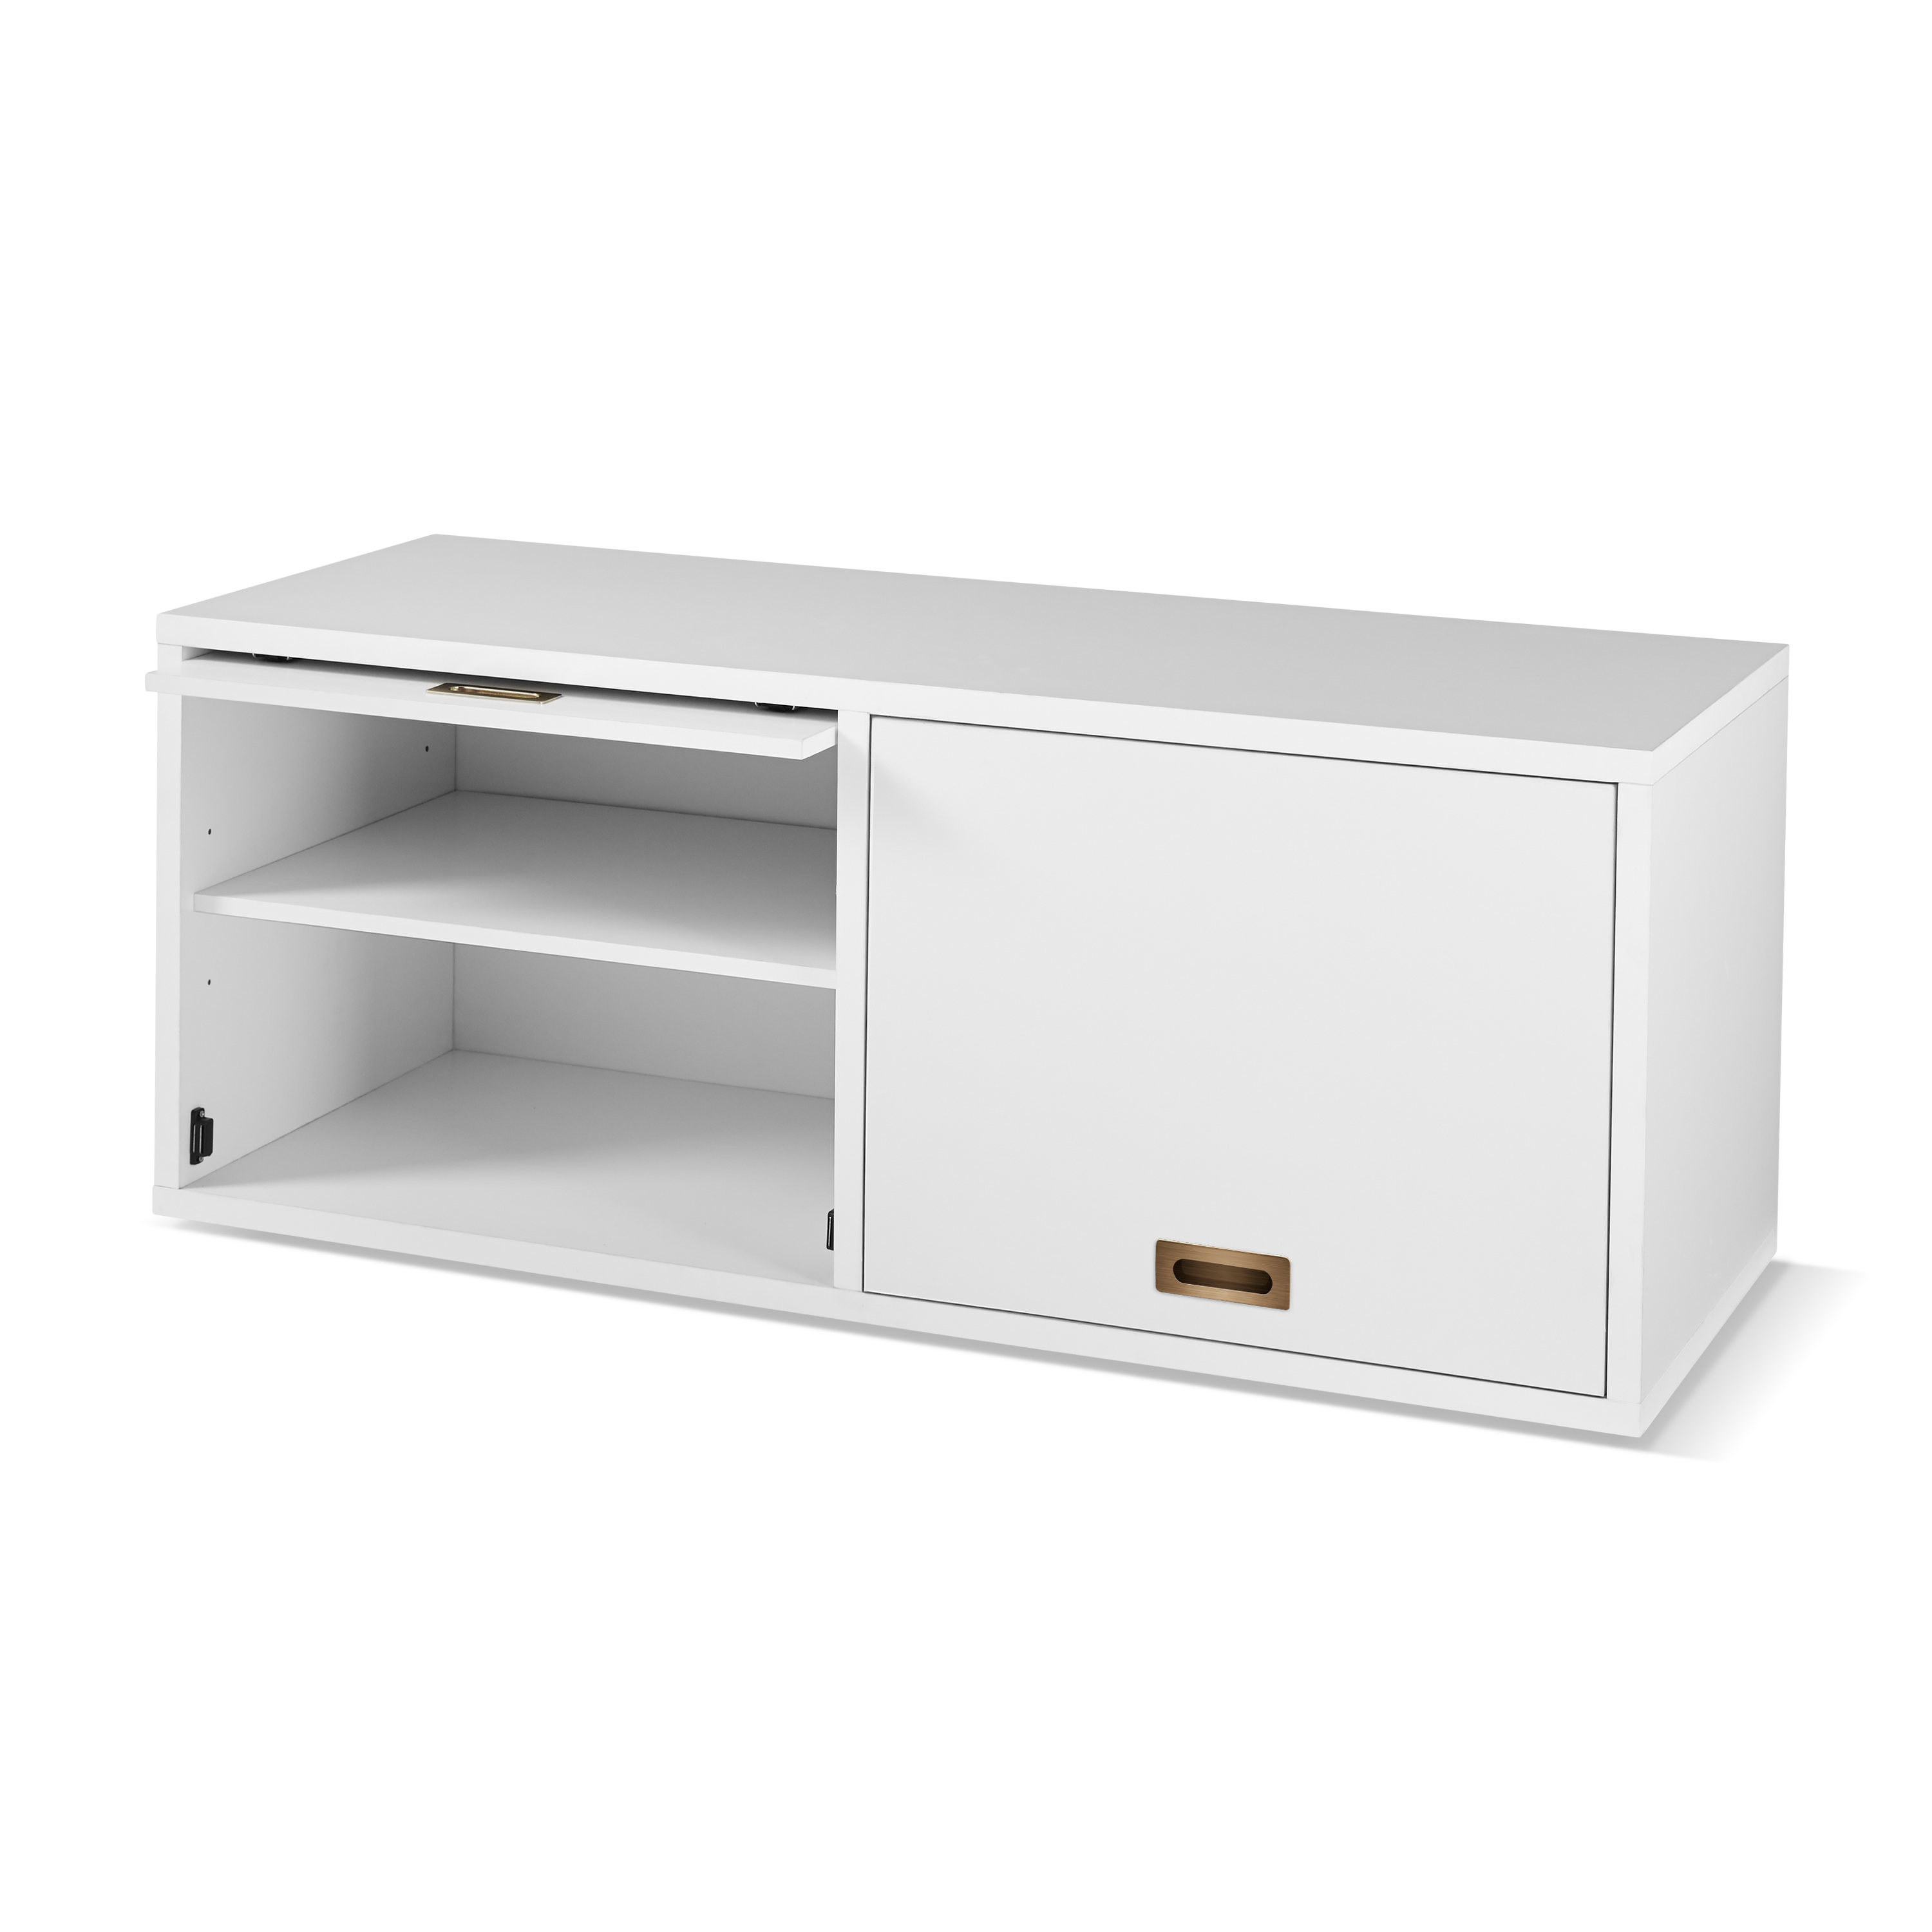 Better Homes & Gardens Ludlow Storage Cabinet with Adjustable Shelves, White - image 1 of 8